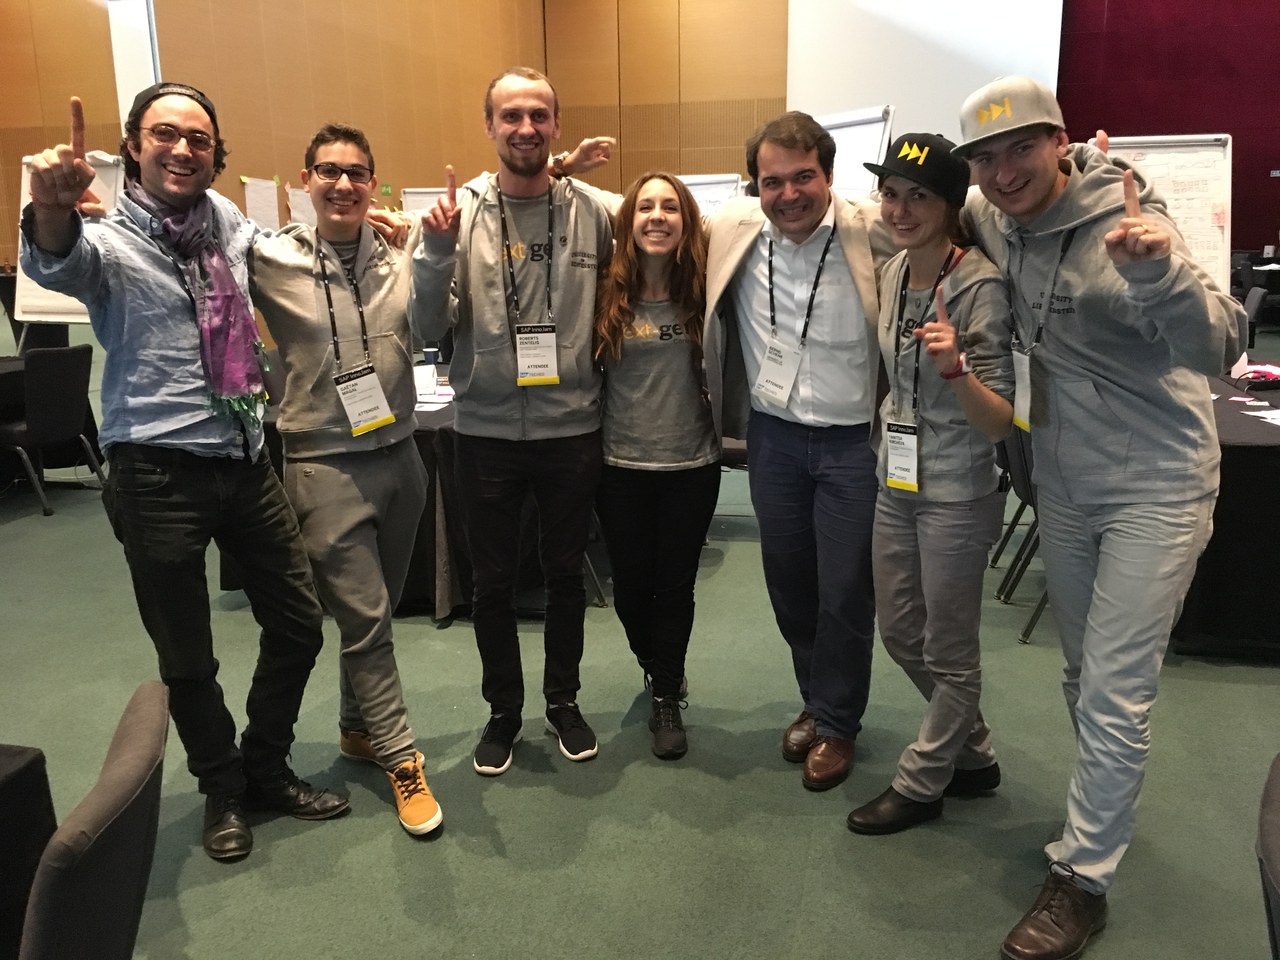 The student team from the University of Liechtenstein together with Dr. Bernd Schenk from the Hilti Chair of Business Process Management and Kevin Flesher, student and last year’s winner of the SAP #DemoJam.